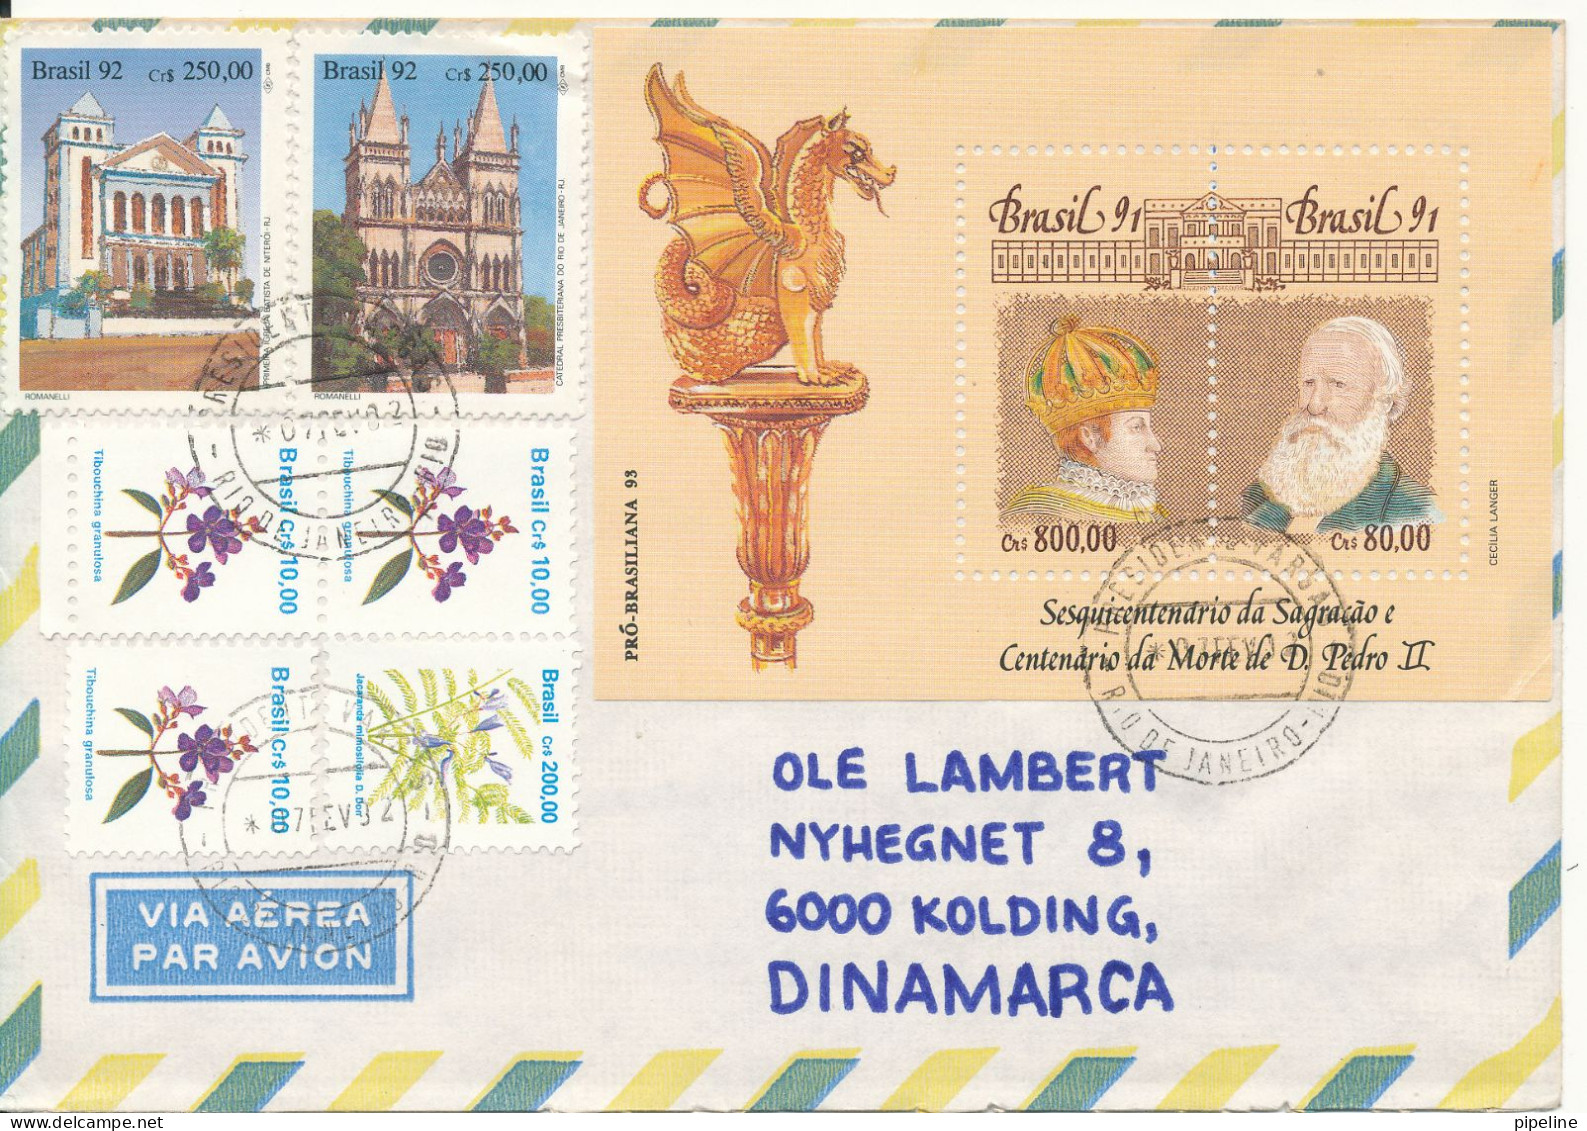 Brazil Air Mail Cover Sent To Denmark 17-2-1992 Topic Stamps And A Souvenir Sheet - Luftpost